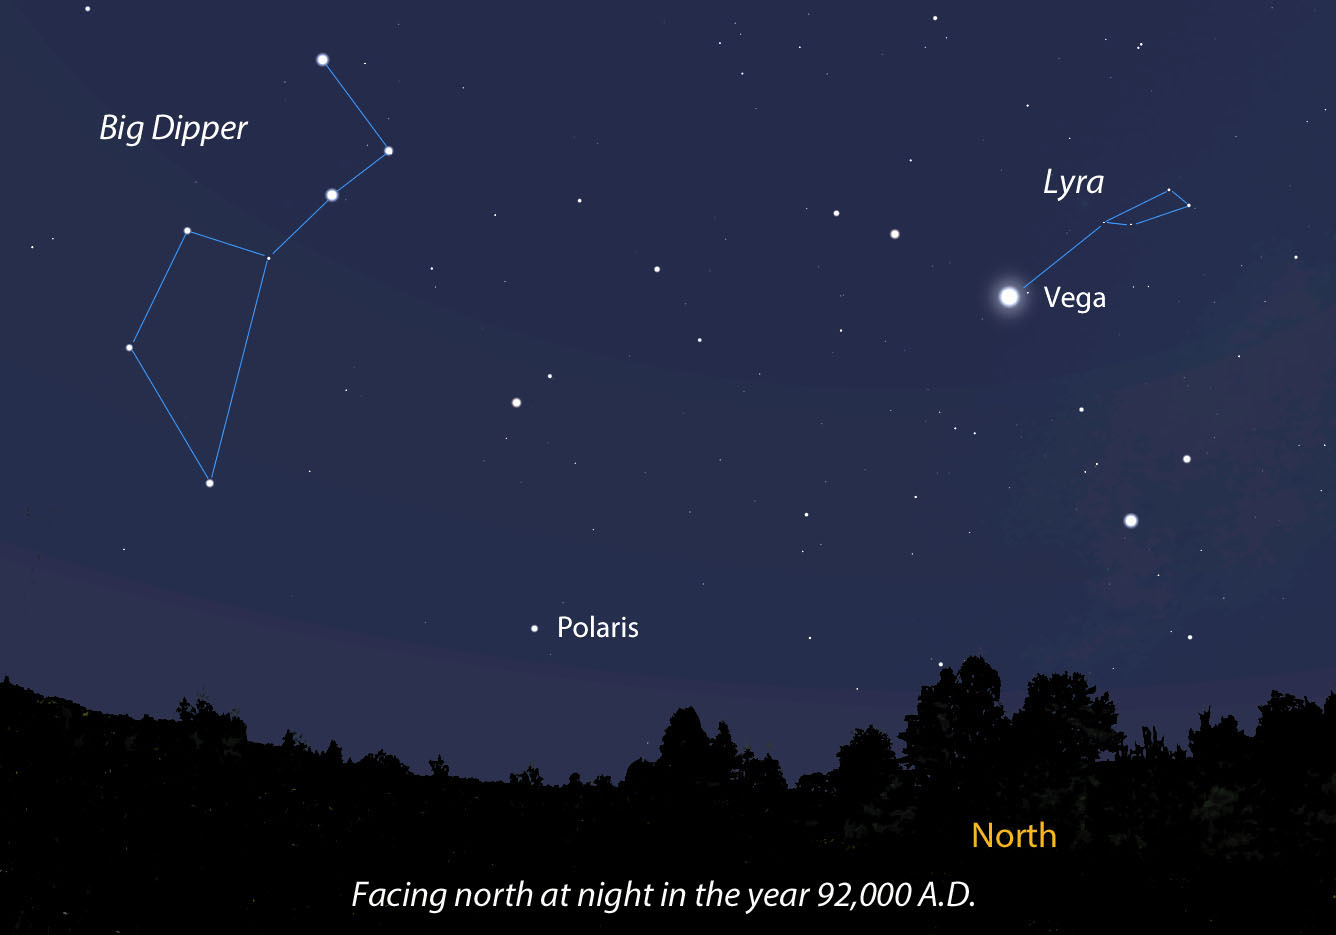 I advanced Stellarium far enough into the future to see how radically the Big Dipper changes shape over time. Notice too that Vega will be the polestar in that distant era. Map: Bob King, Source: Stellarium